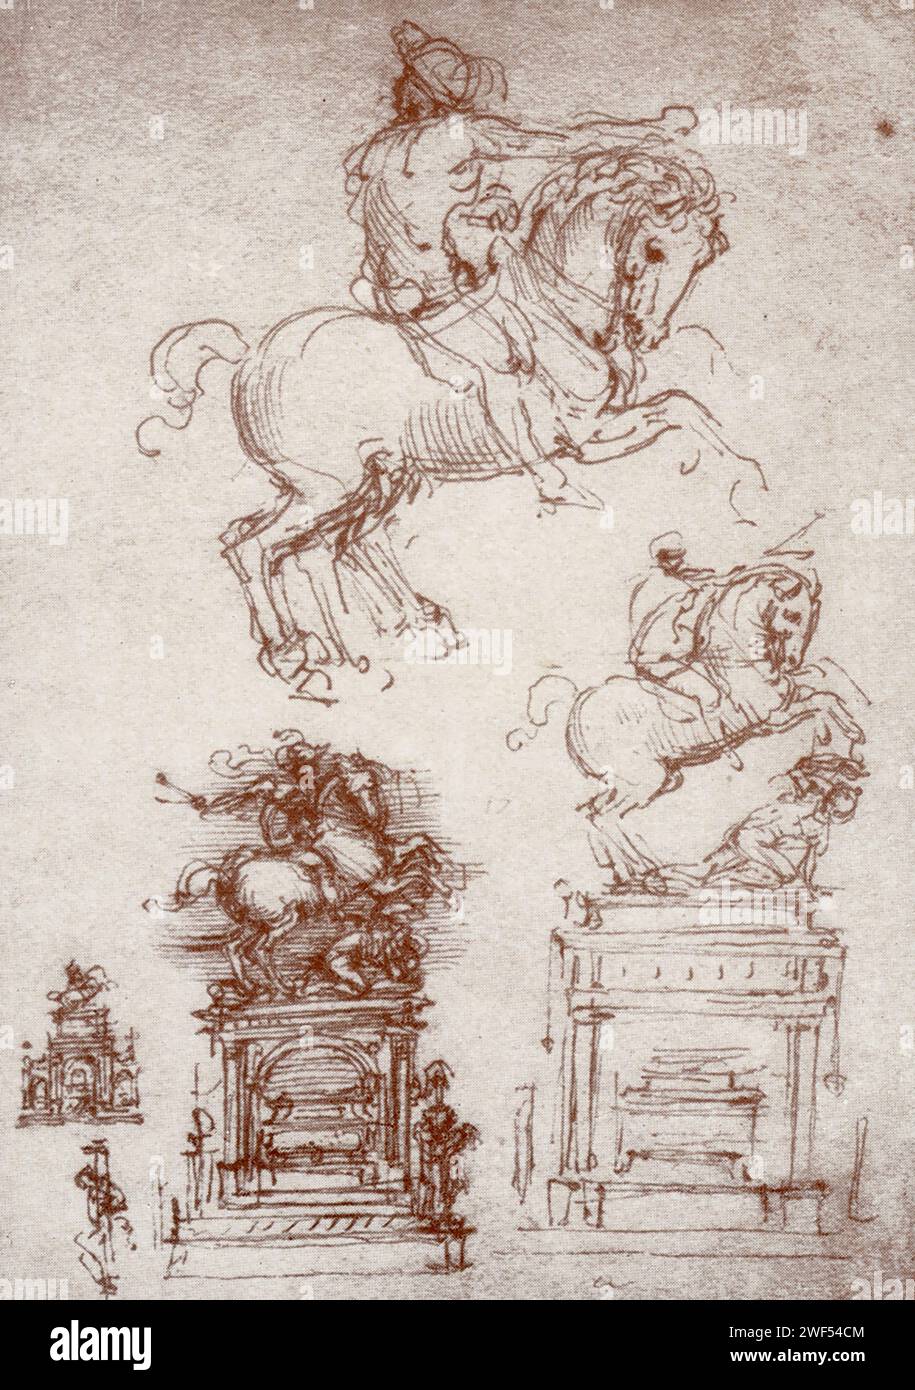 These hand drawings of Leonardo da Vinci show drafts for a knight monument. Leonardo received the order twice to carry out such an assignment, first from Ludovico il Moro for Francesco Sforza and second for Ludwig XII for Marshall Trivulzio. Leonardo di ser Piero da Vinci (1452-1519) was an Italian polymath of the High Renaissance who was active as a painter, draughtsman, engineer, scientist, theorist, sculptor, and architect. Stock Photo